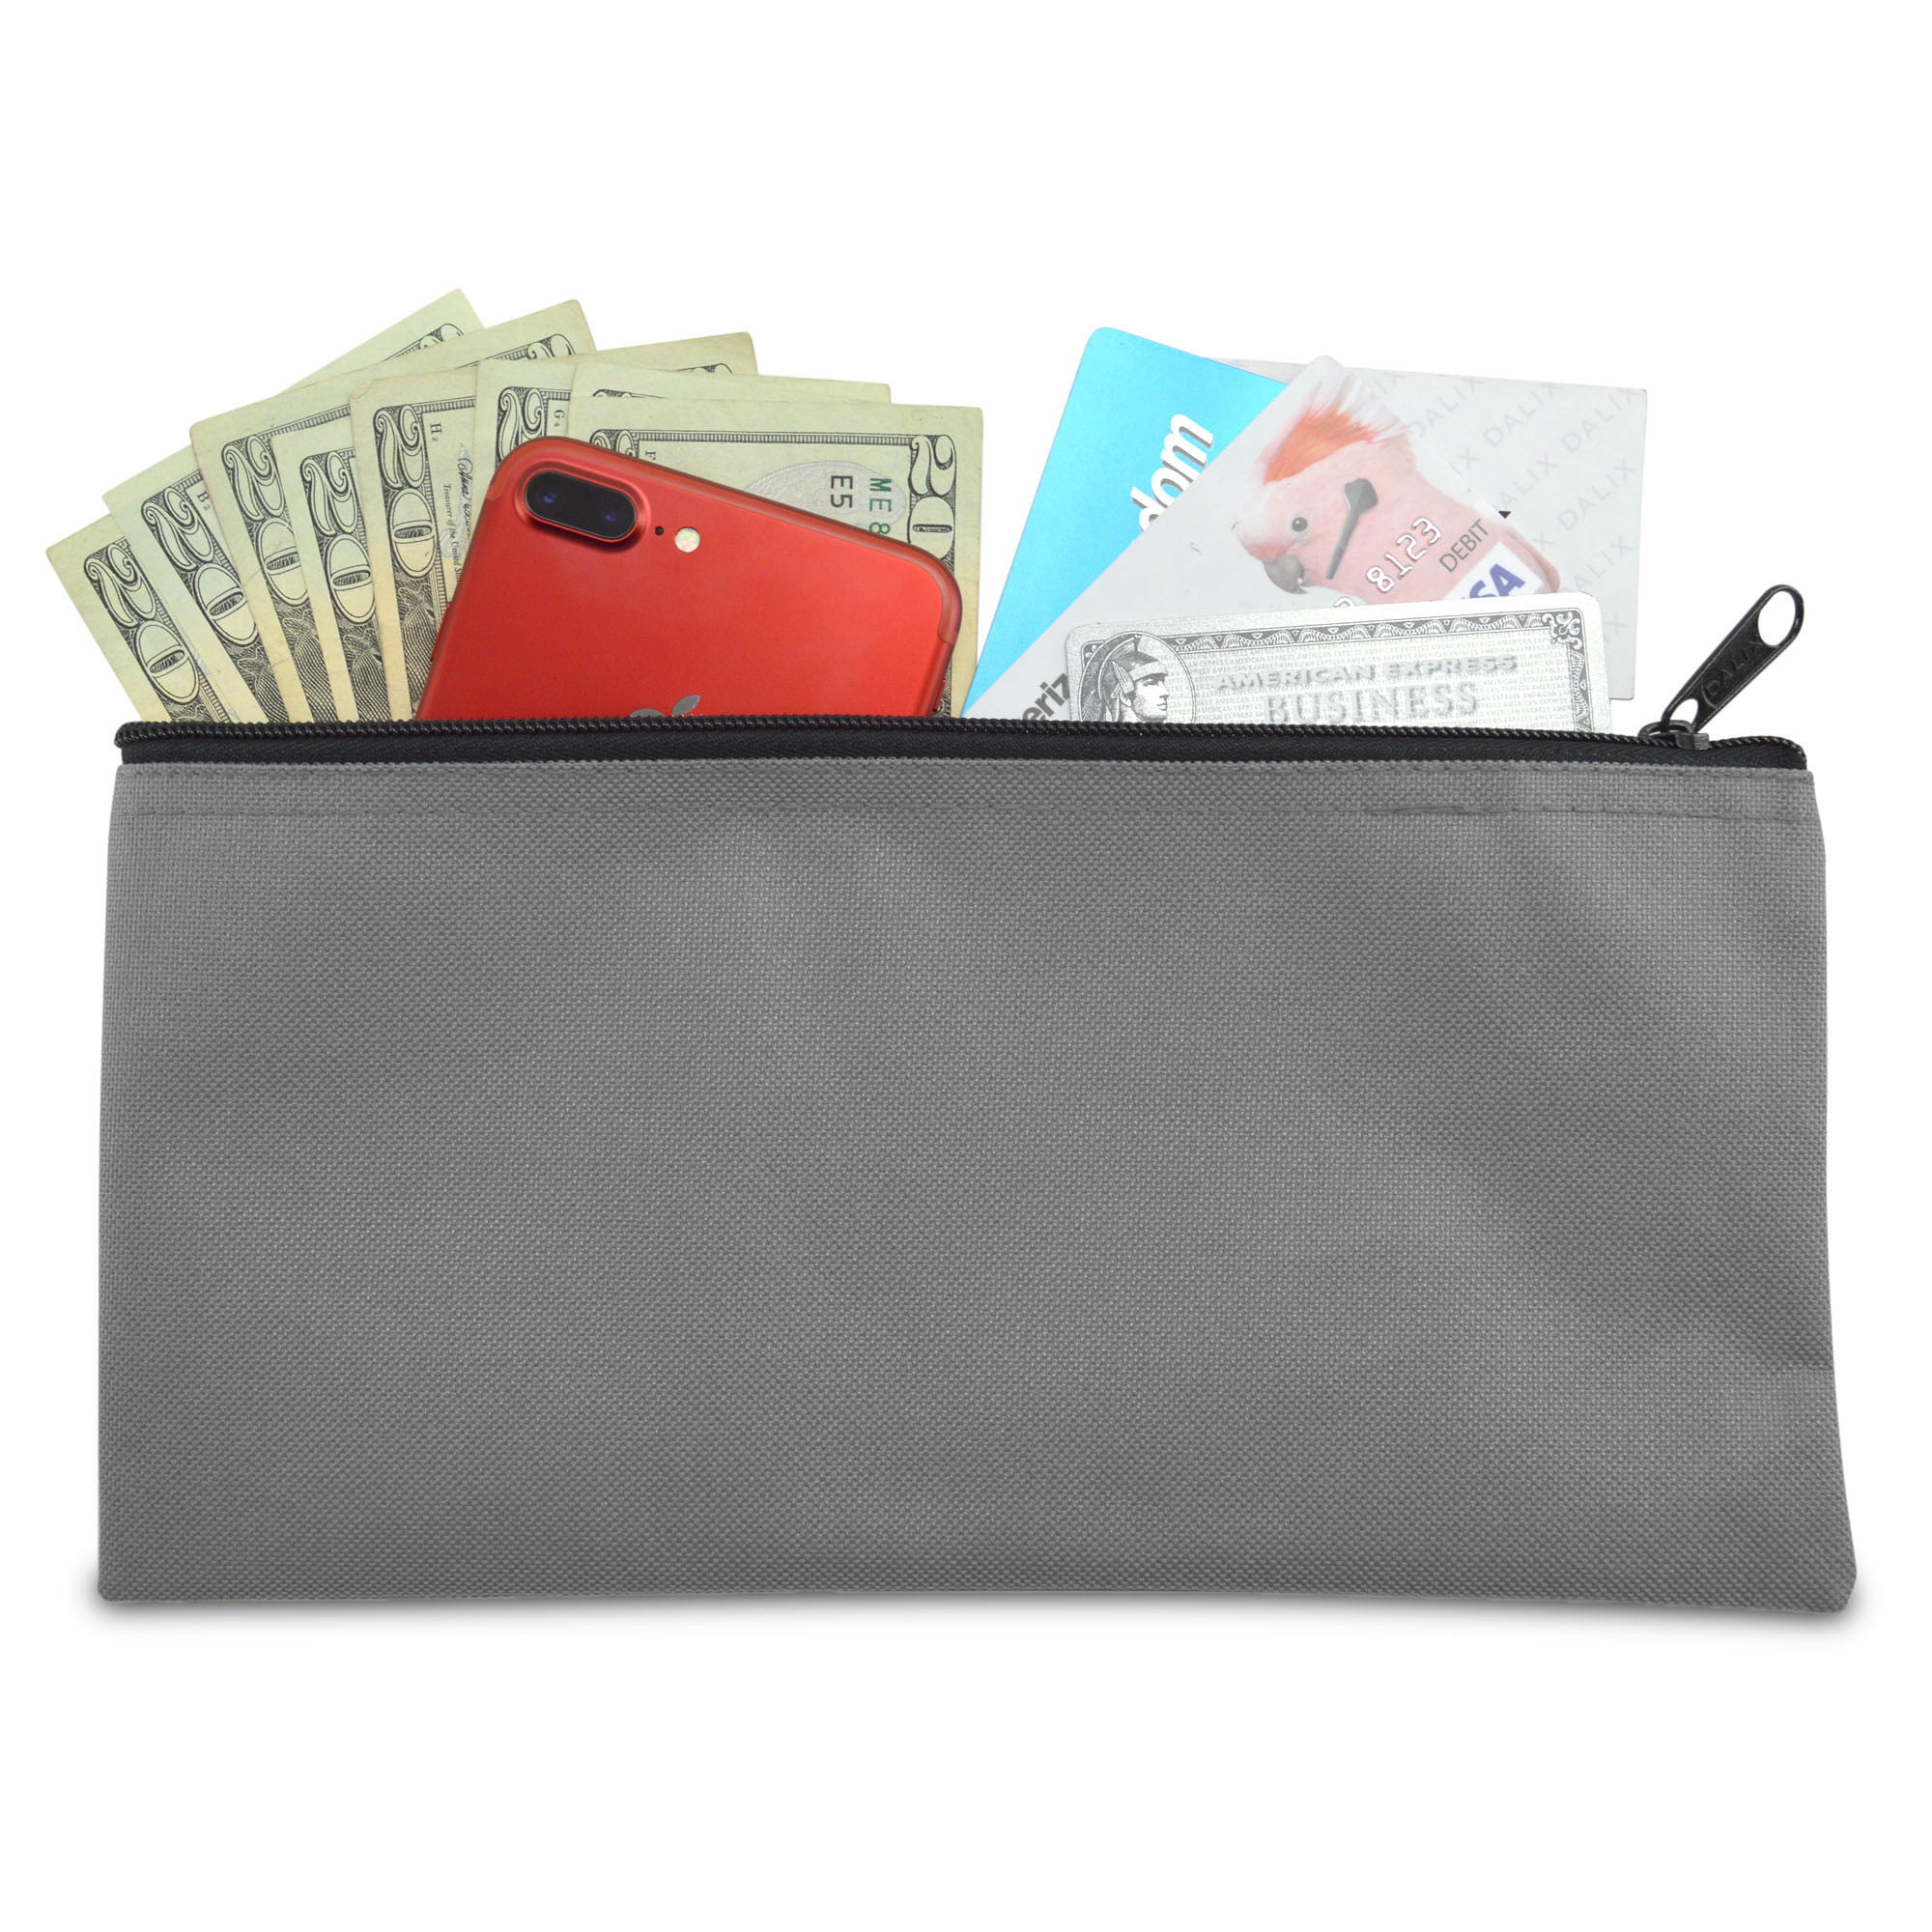 Eastern Counties Leather Womens Contrast Leather Coin Purse - Walmart.com